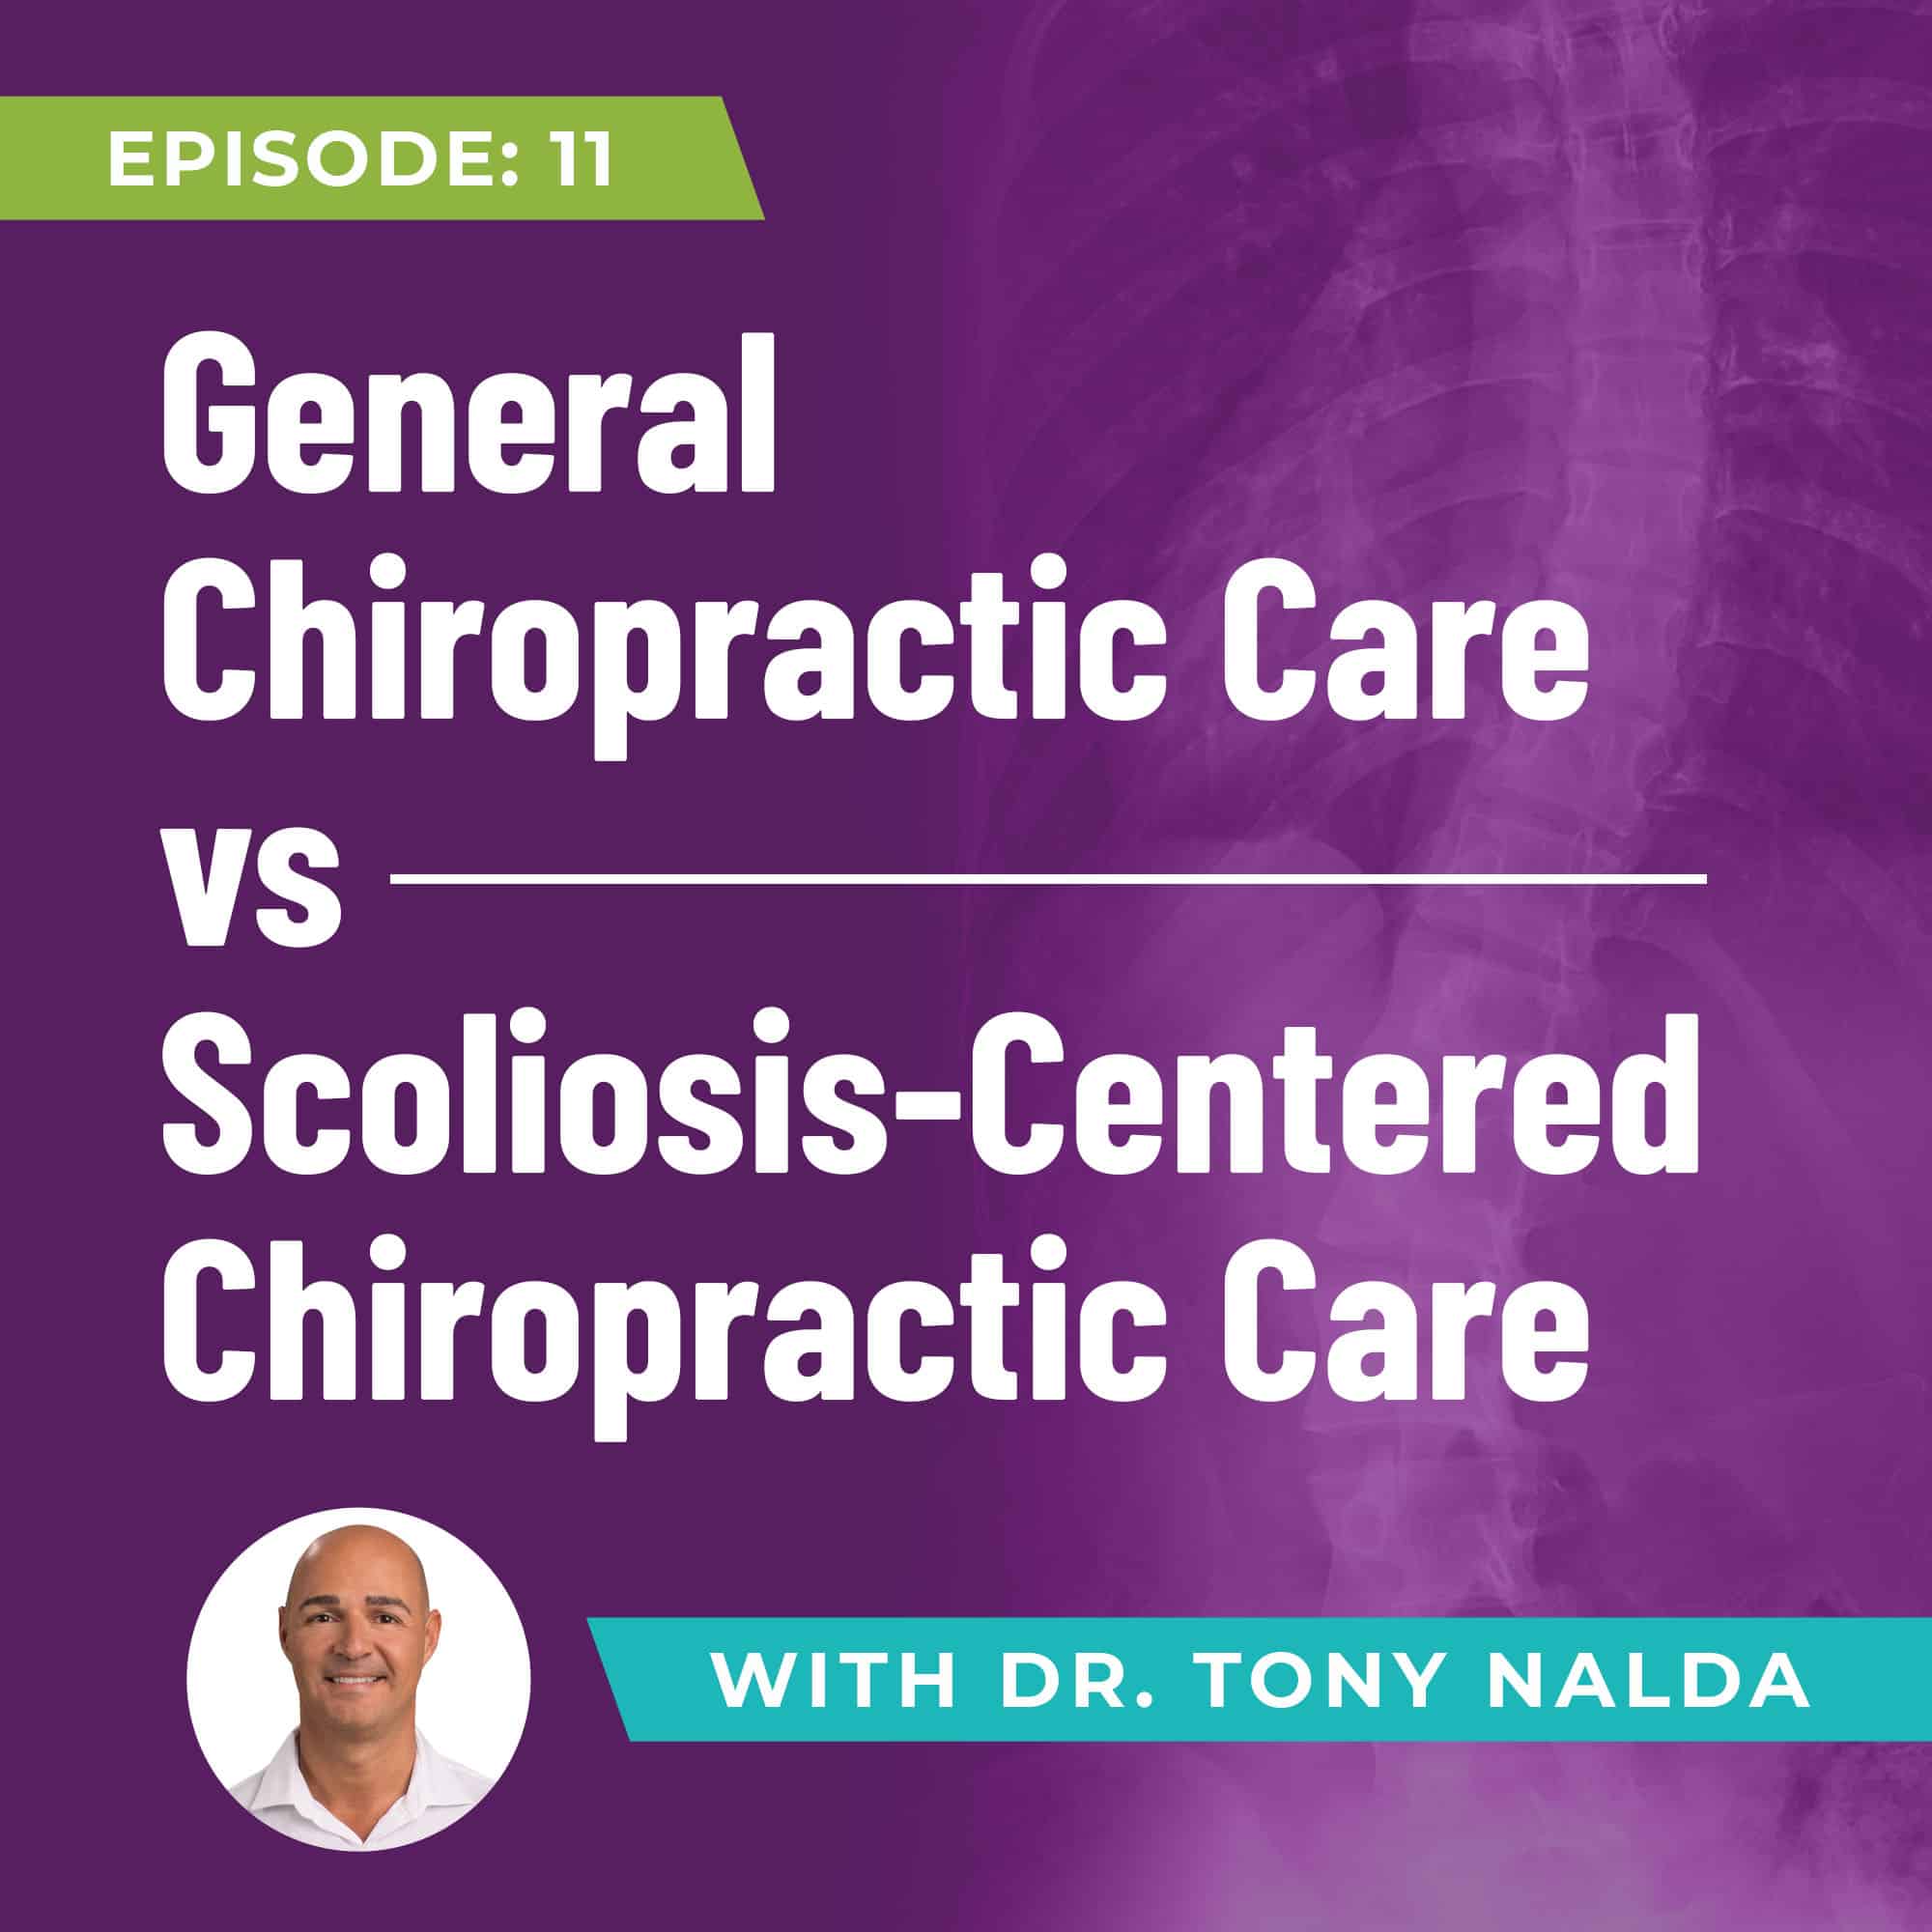 11 General Chiropractic Care vs Scoliosis Centered Chiropractic Care